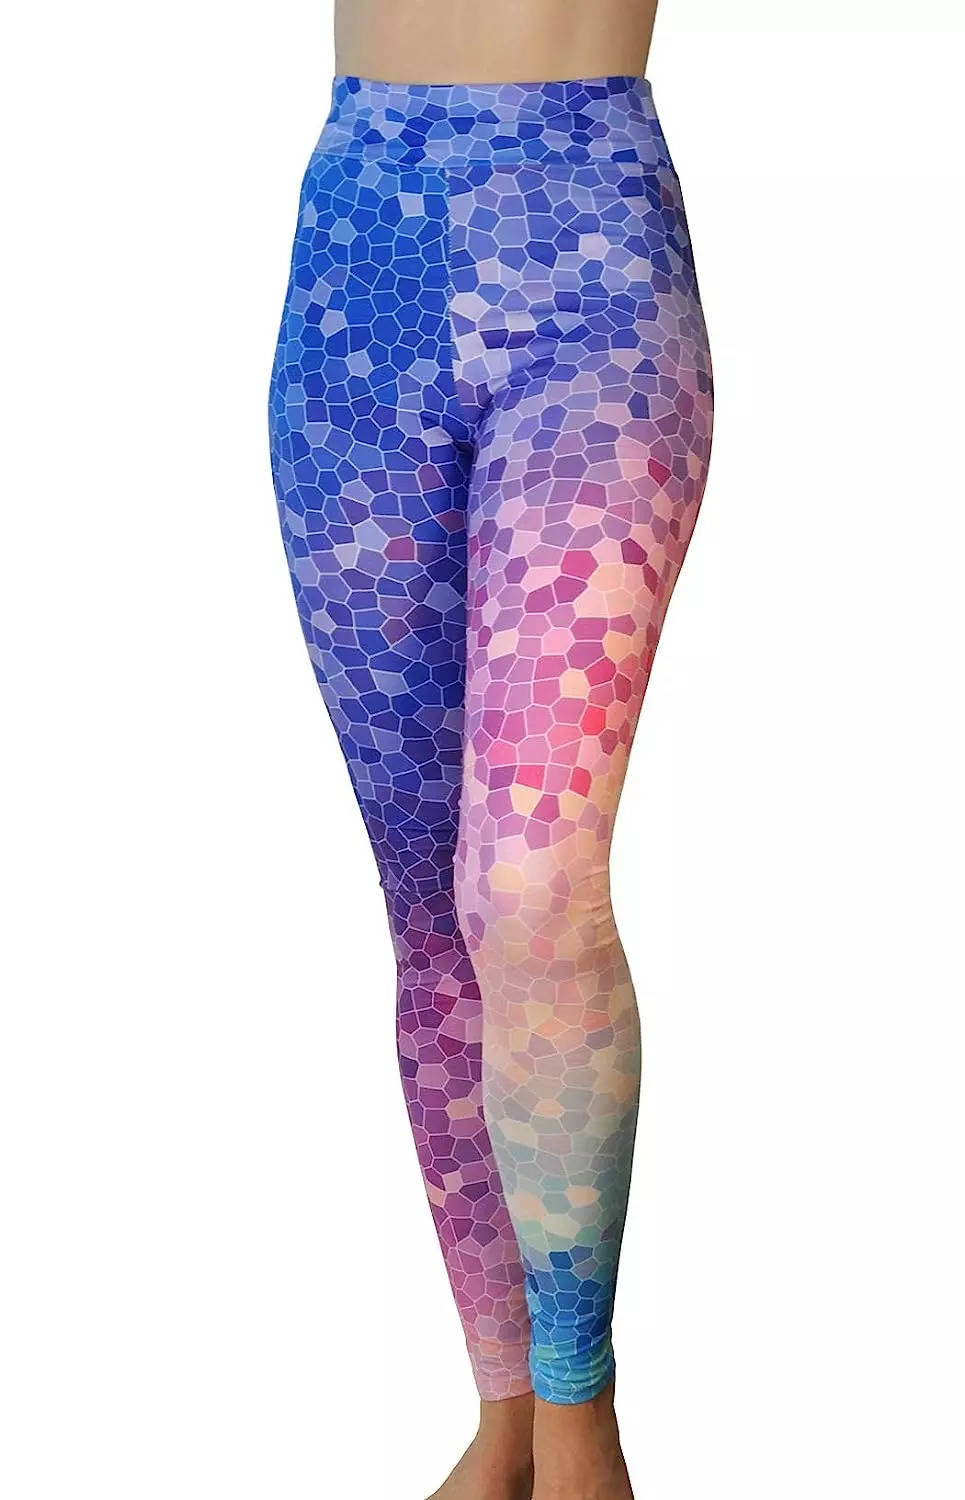 ICIW Shape legging - love these!  Womens printed leggings, Workout  clothes, Sports leggings